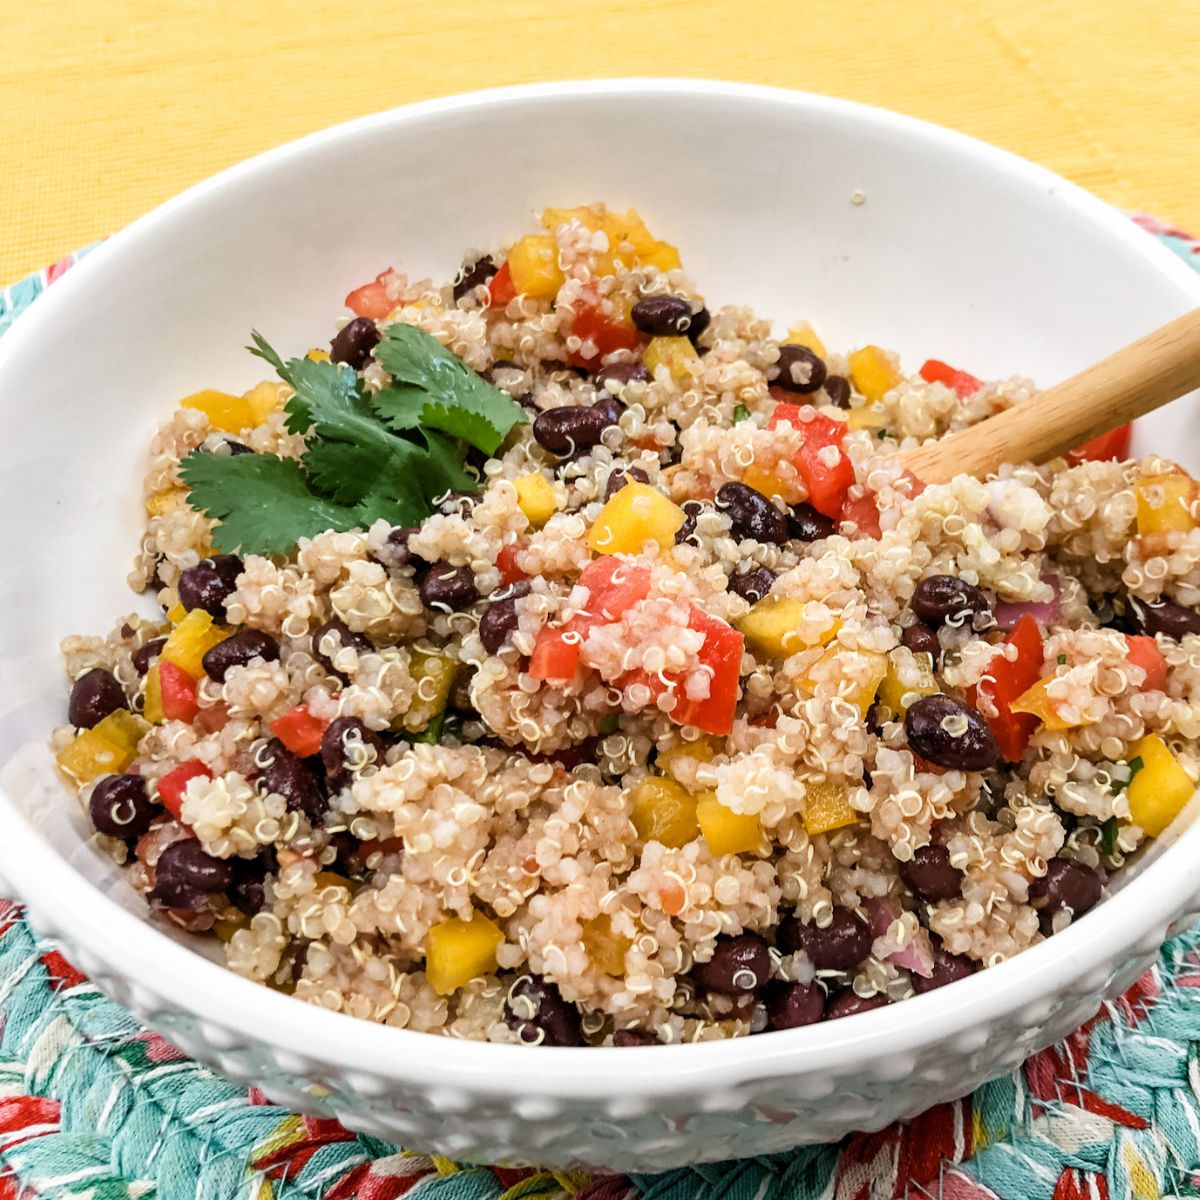 southwestern quinoa salad in white bowl with wooden spoon